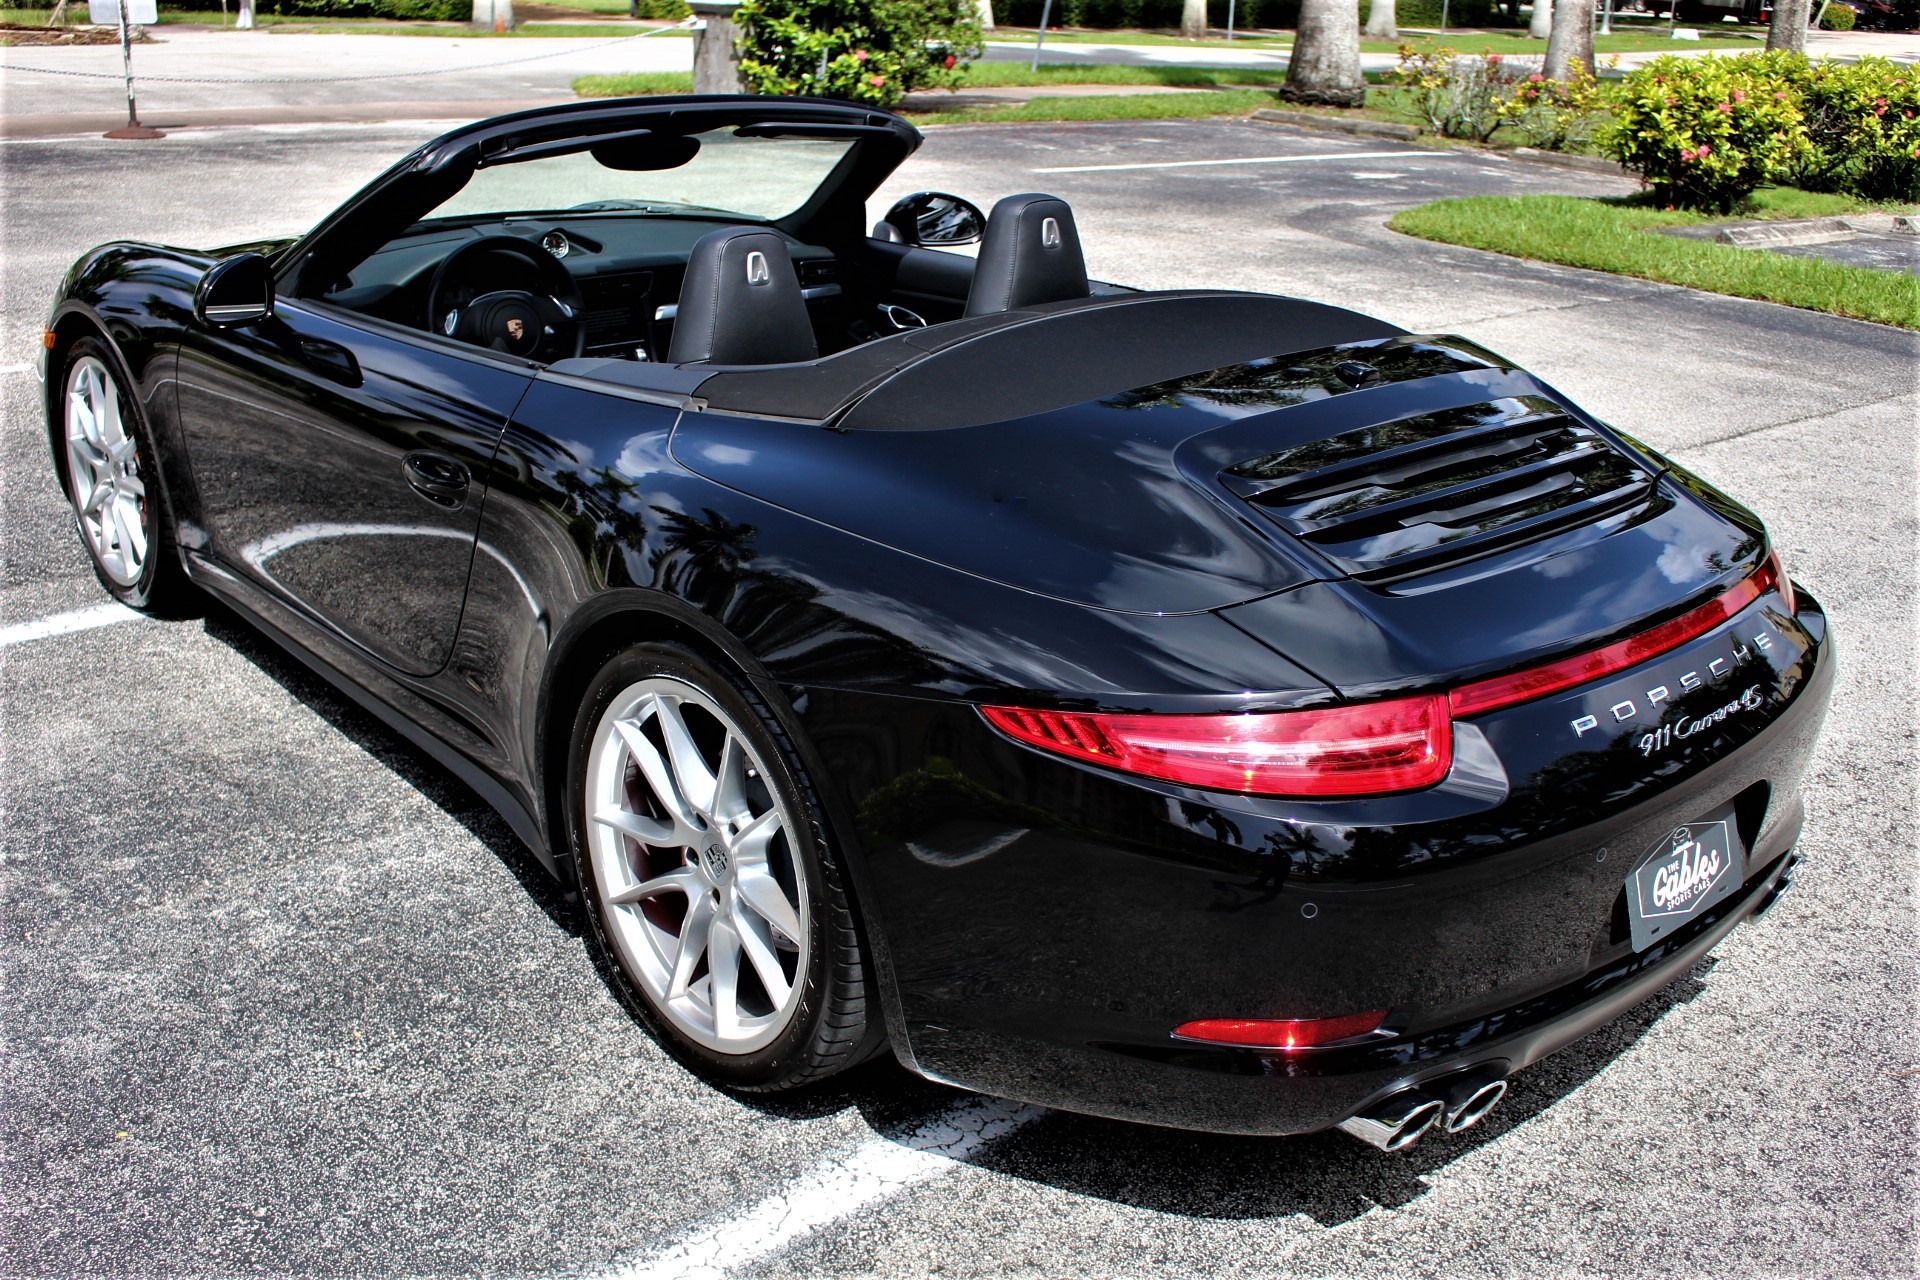 Used 2013 Porsche 911 Carrera 4S for sale Sold at The Gables Sports Cars in Miami FL 33146 2